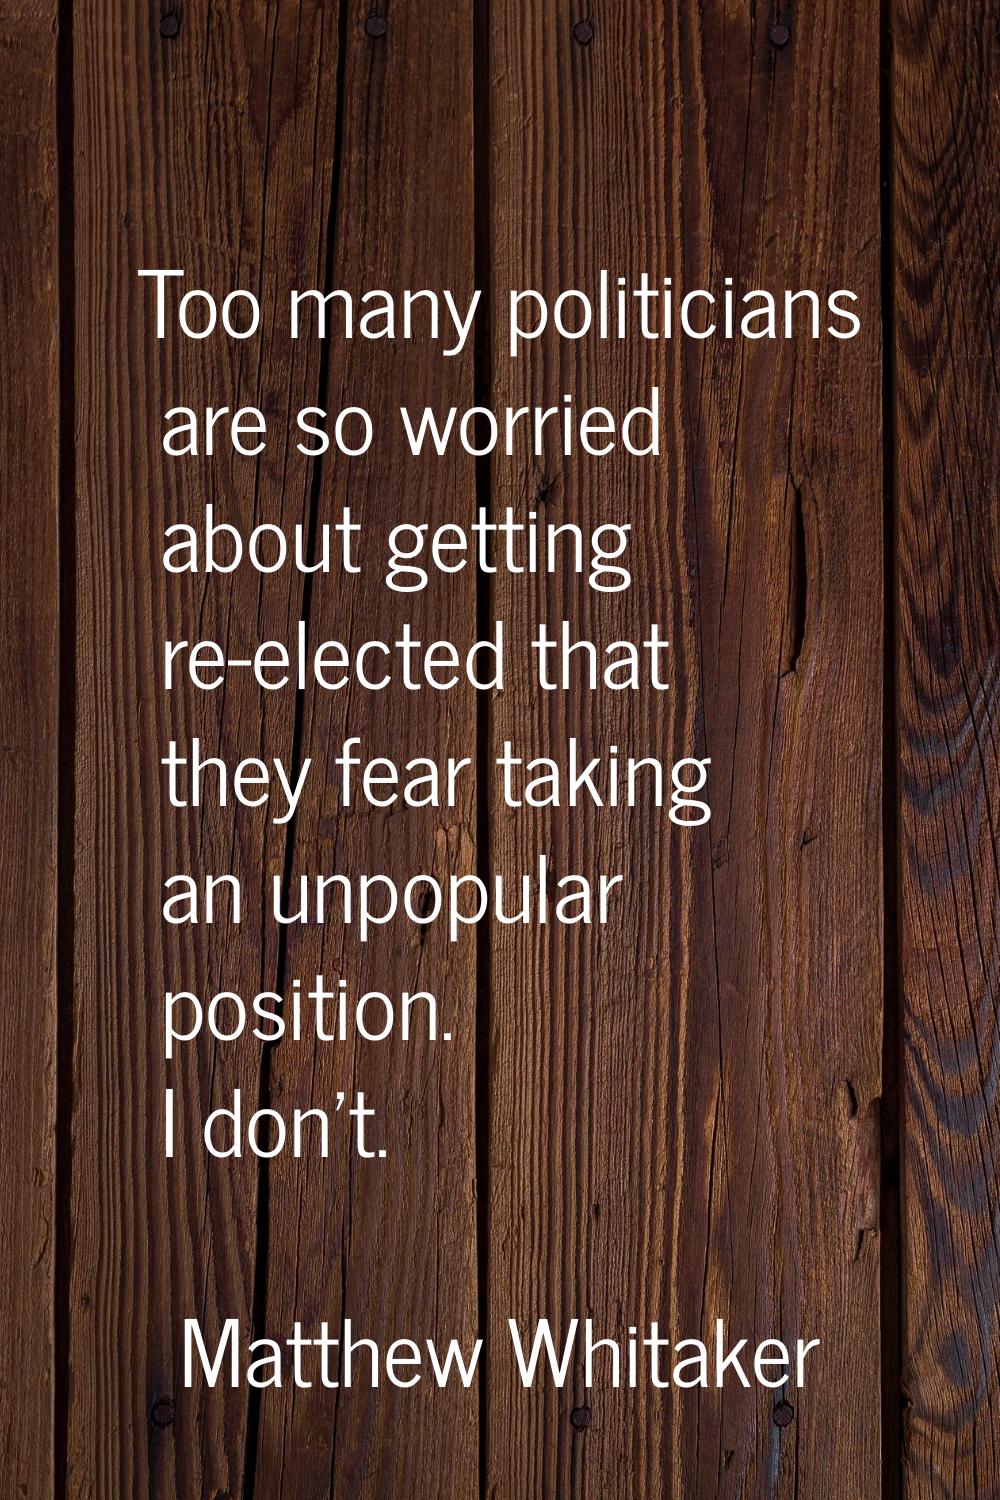 Too many politicians are so worried about getting re-elected that they fear taking an unpopular pos